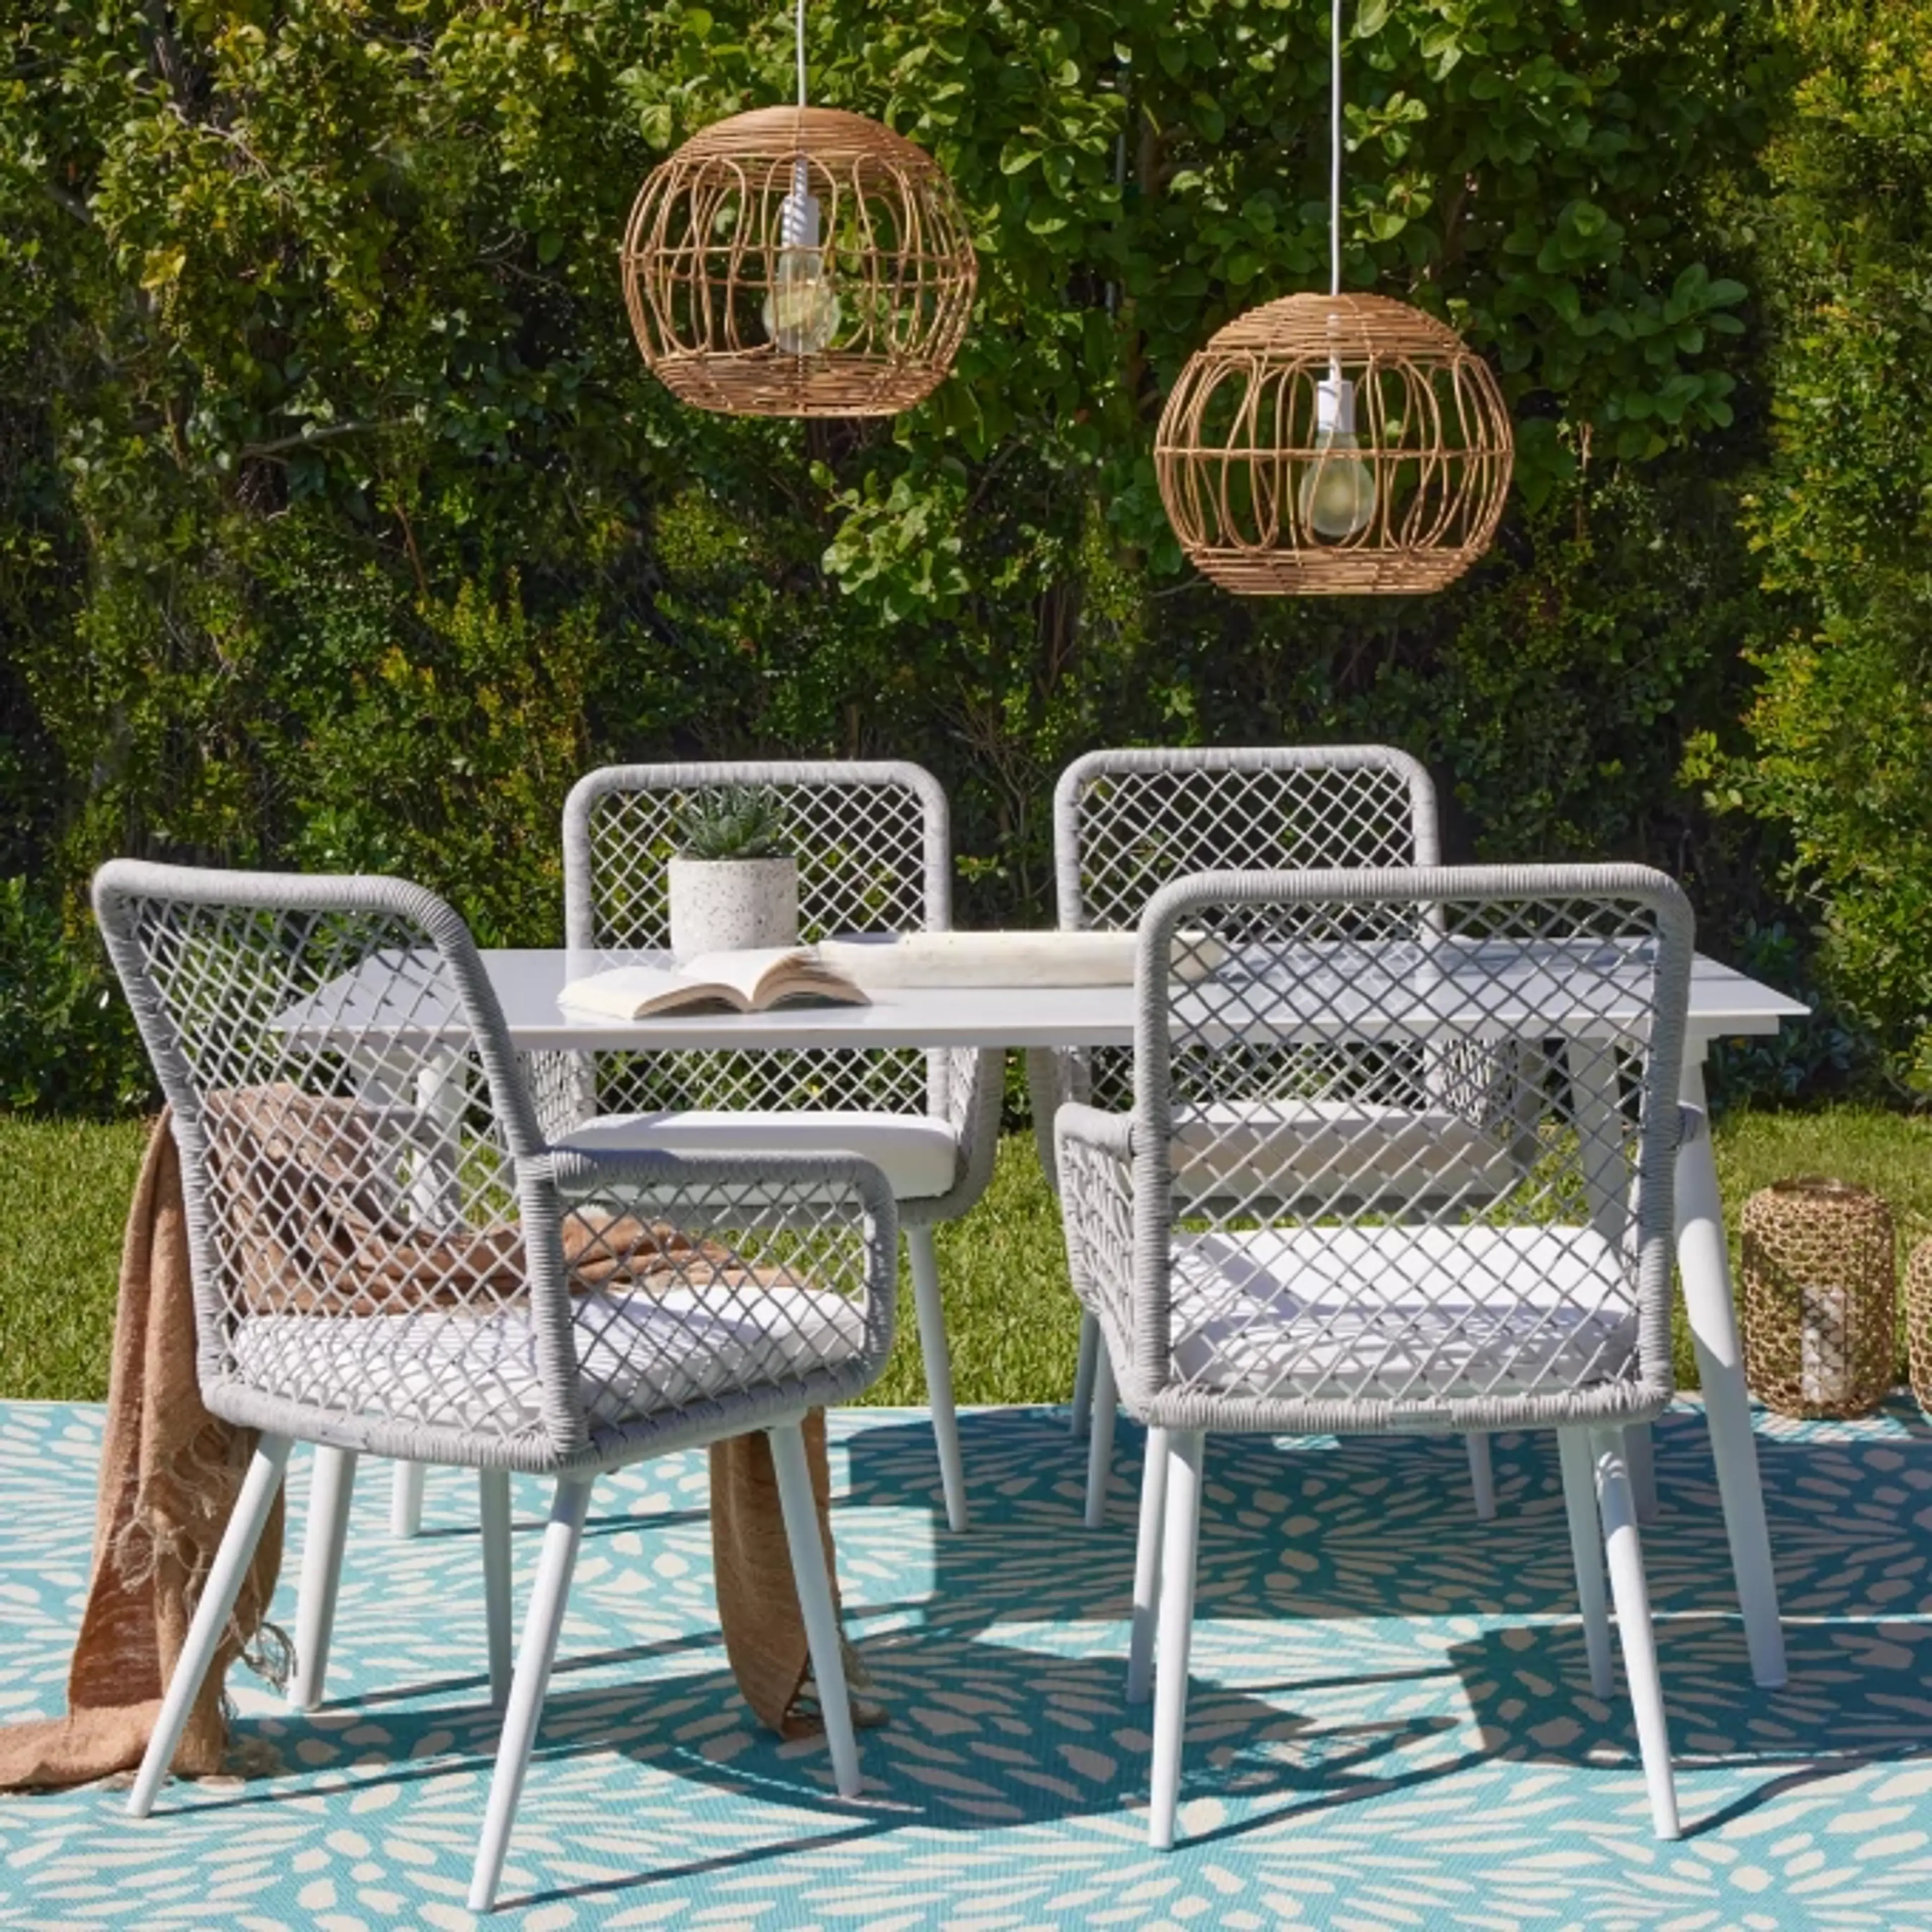 Importance of Outdoor Furniture Maintenance